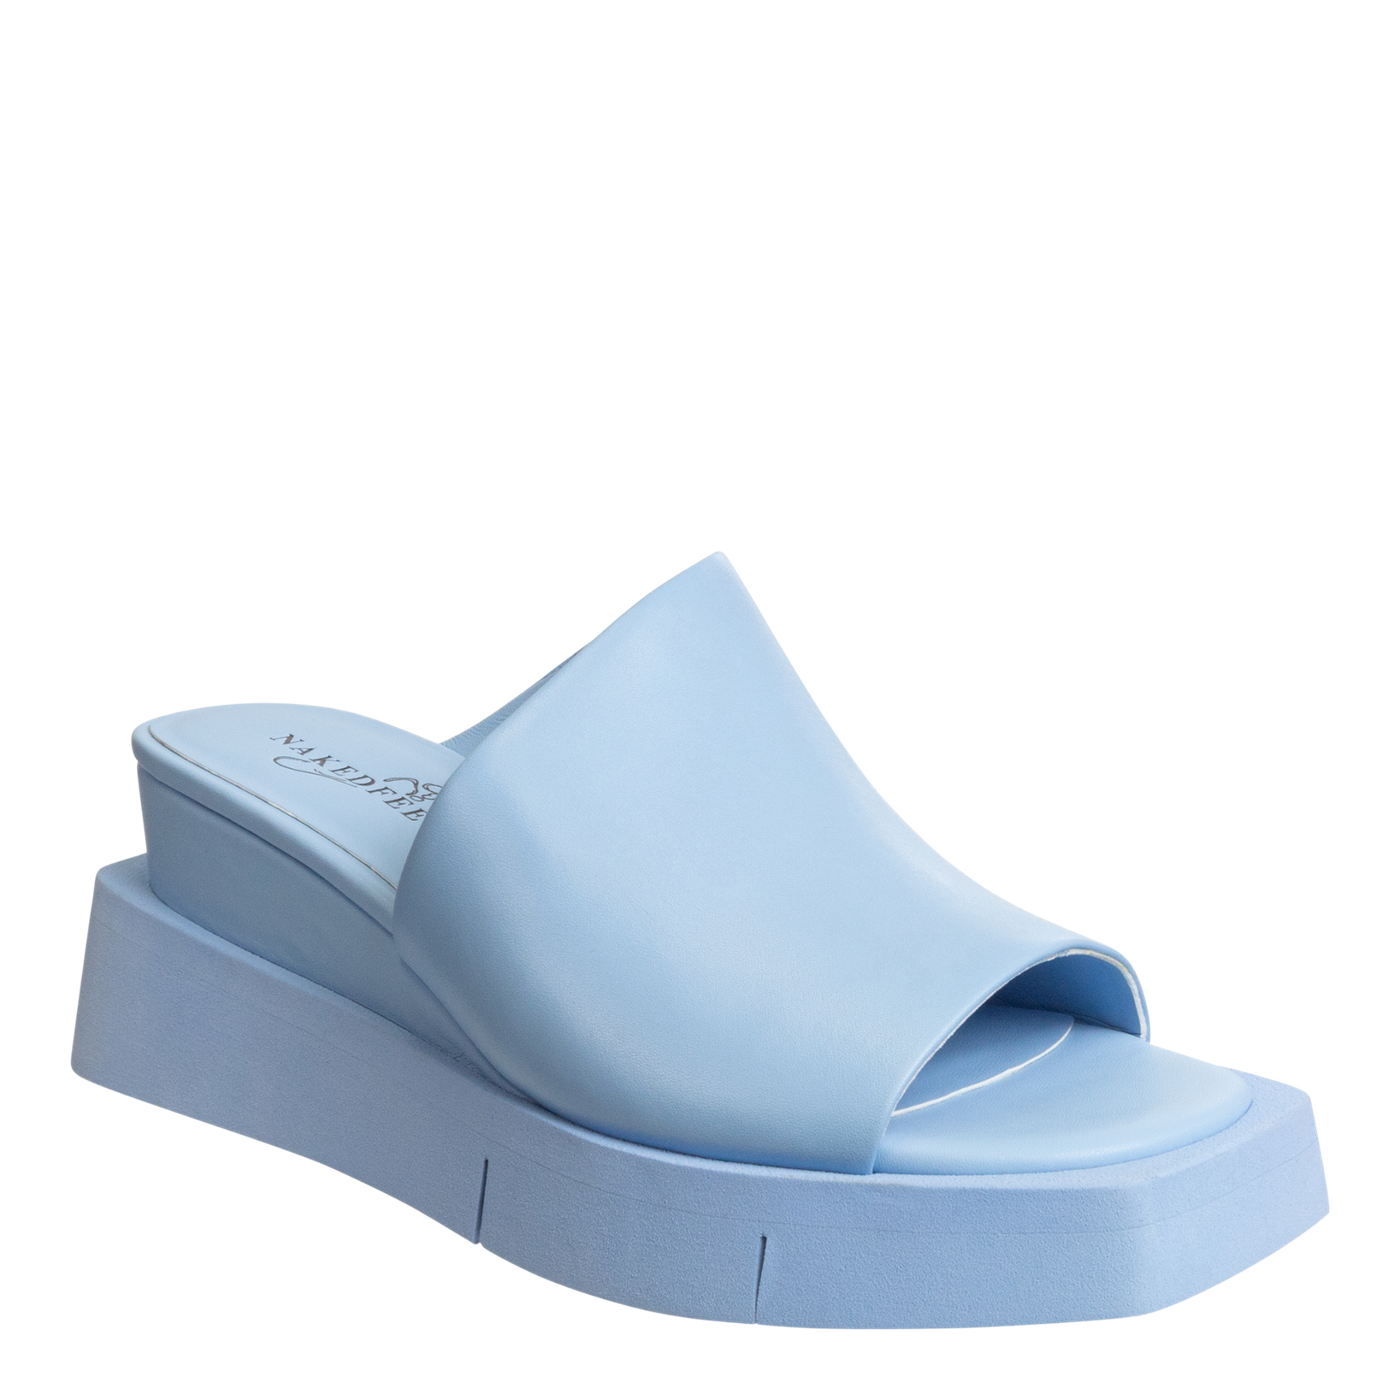 NAKED FEET - INFINITY in LIGHT BLUE Wedge Sandals